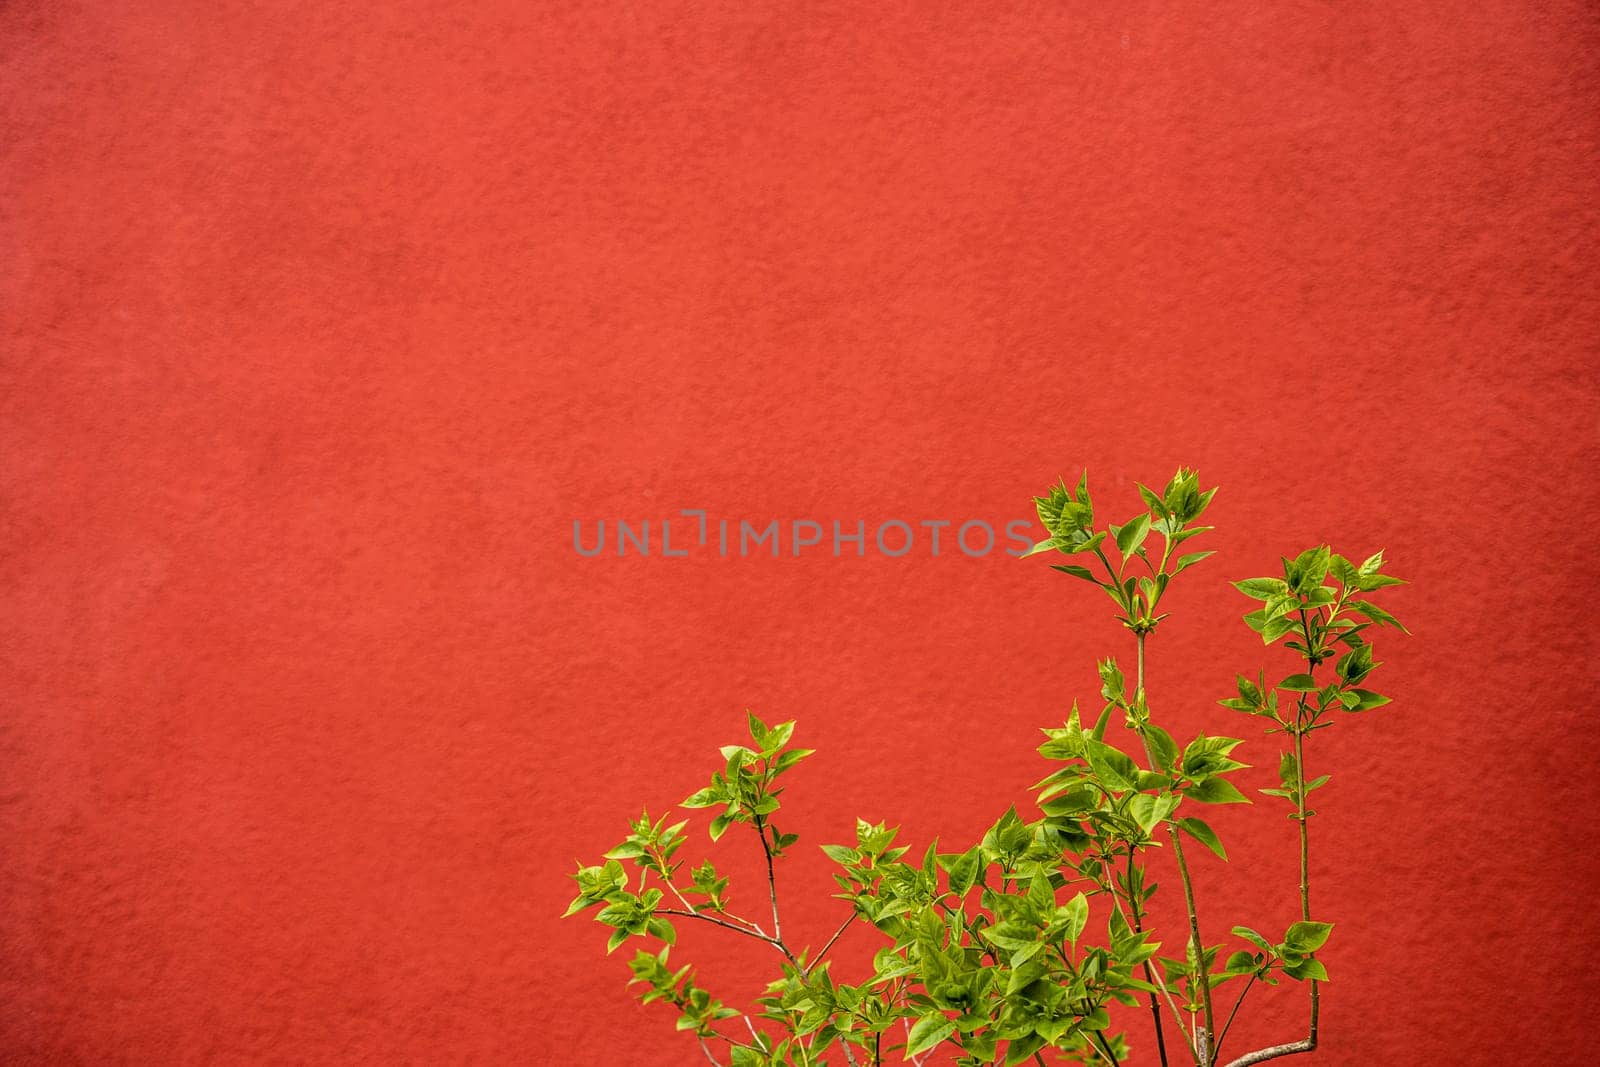 a green tree branch on a red-orange textured background.. greenery by audiznam2609